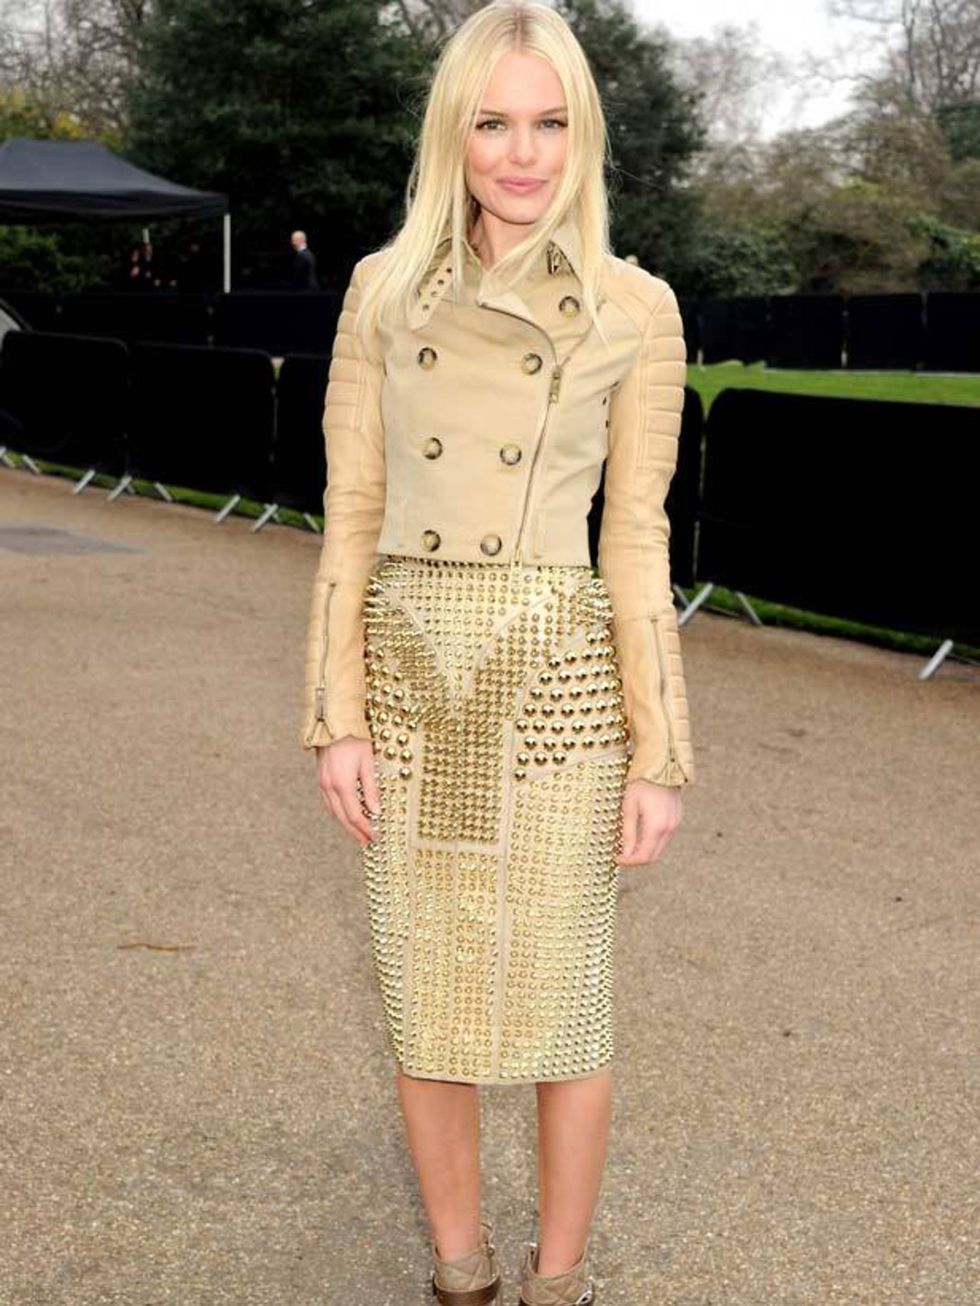 <p><a href="http://www.elleuk.com/starstyle/style-files/%28section%29/kate-bosworth/%28offset%29/0/%28img%29/462392">Kate Bosworth</a> wearing a cropped Burberry trench and studded SS11 Burberry pencil skirt at the Burberry AW11 show in London, 21 Februar